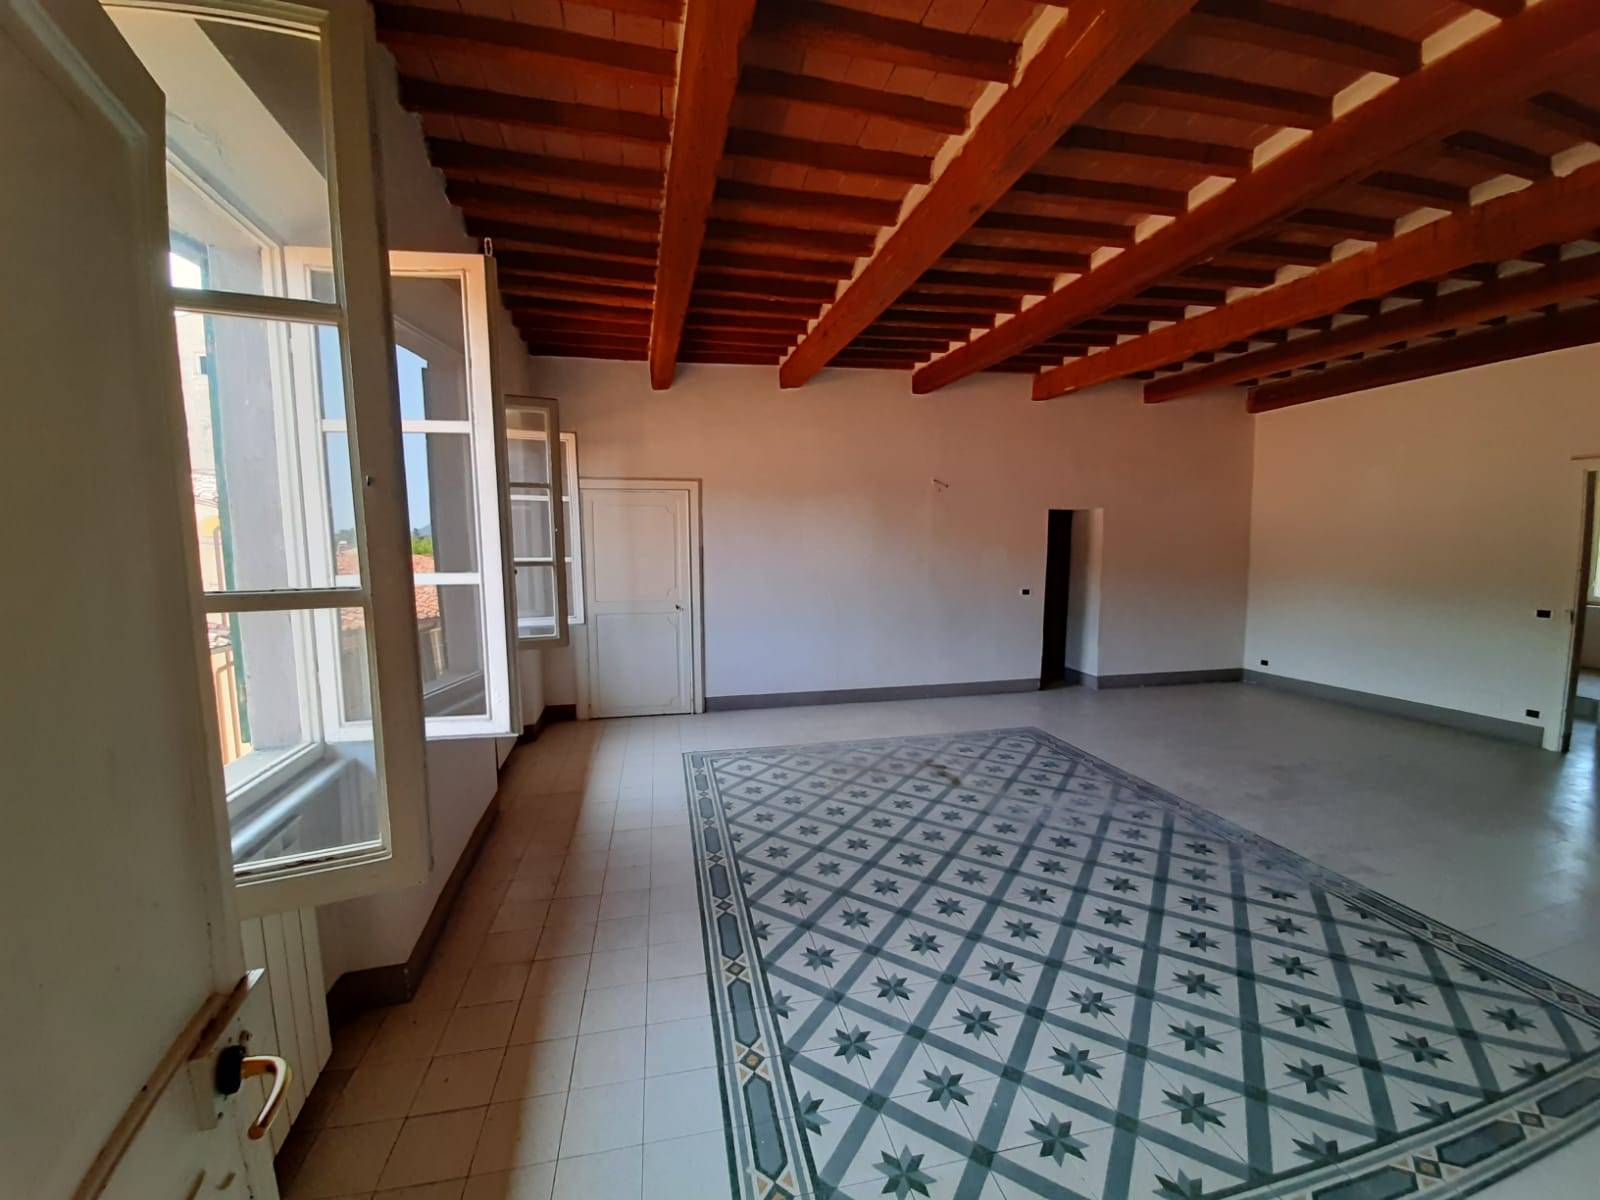 Quartiere San Francesco, Pisa, Apartment for sale of 145 Sq. mt., Excellent Condition, Heating Individual heating system, Epi: 0 kwh/m2 year, placed 